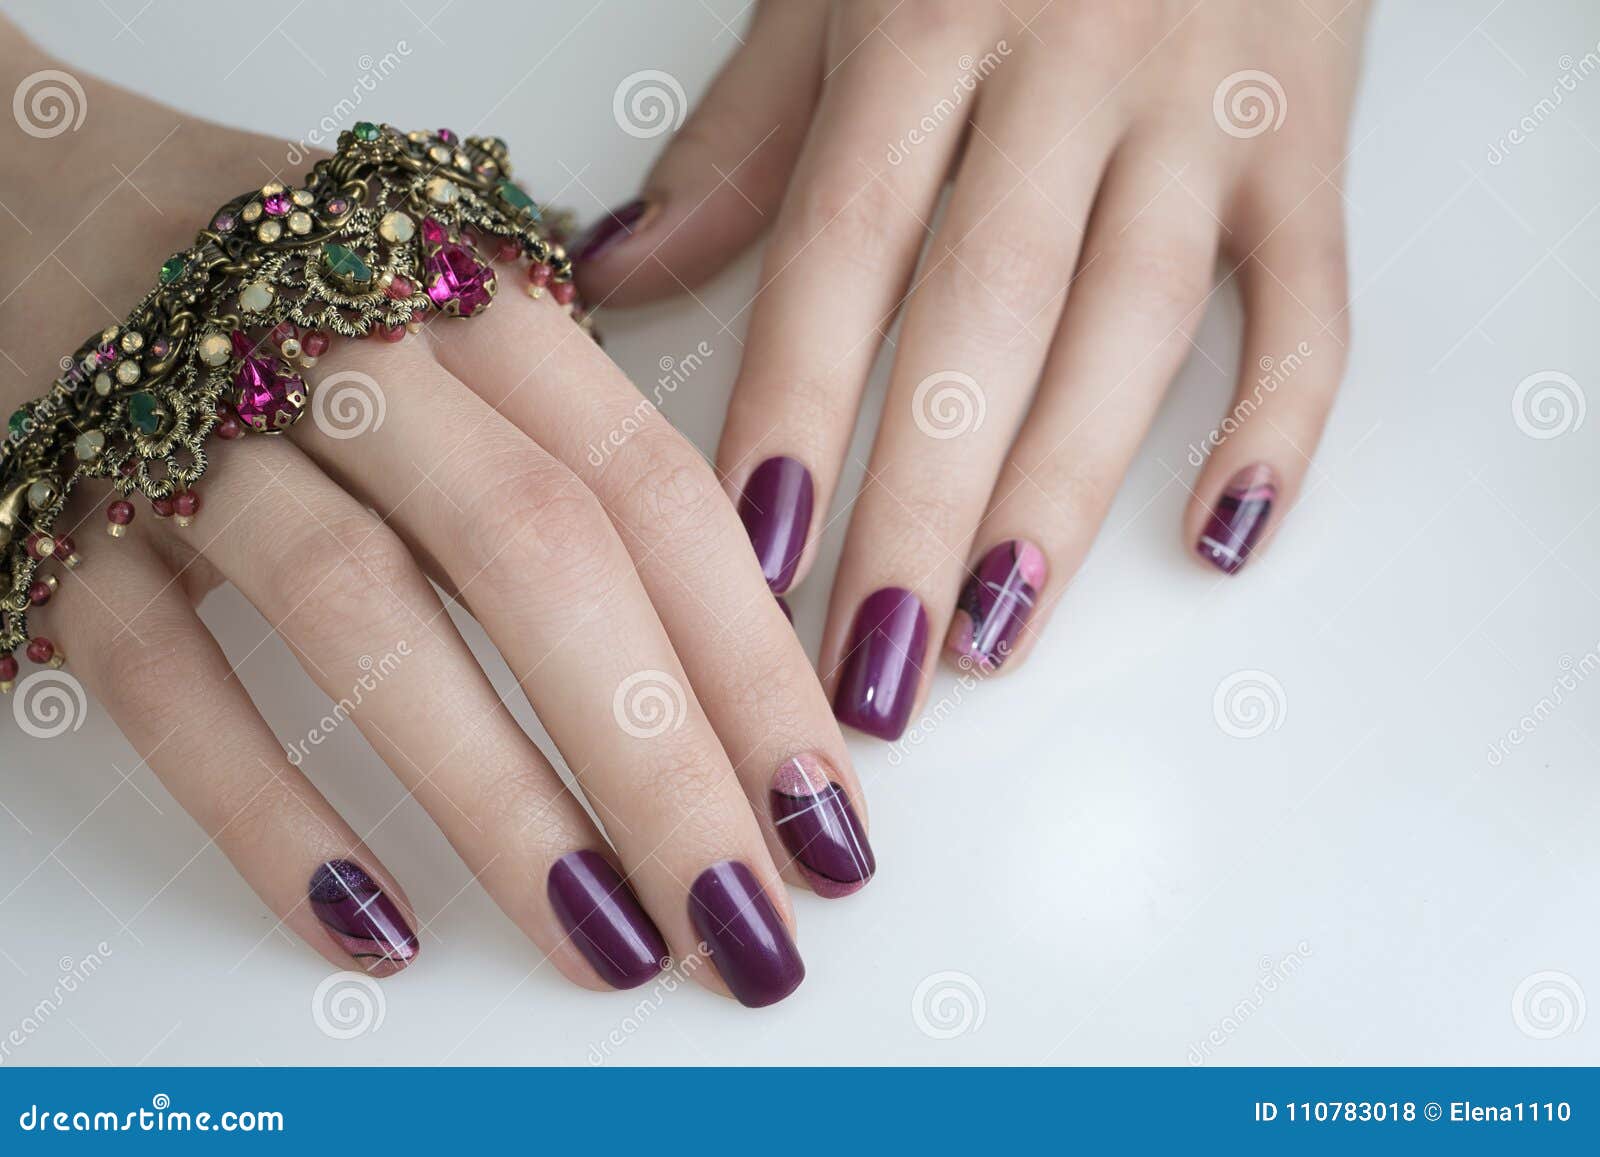 manicured woman`s nails with french nail art. nailart manicure.